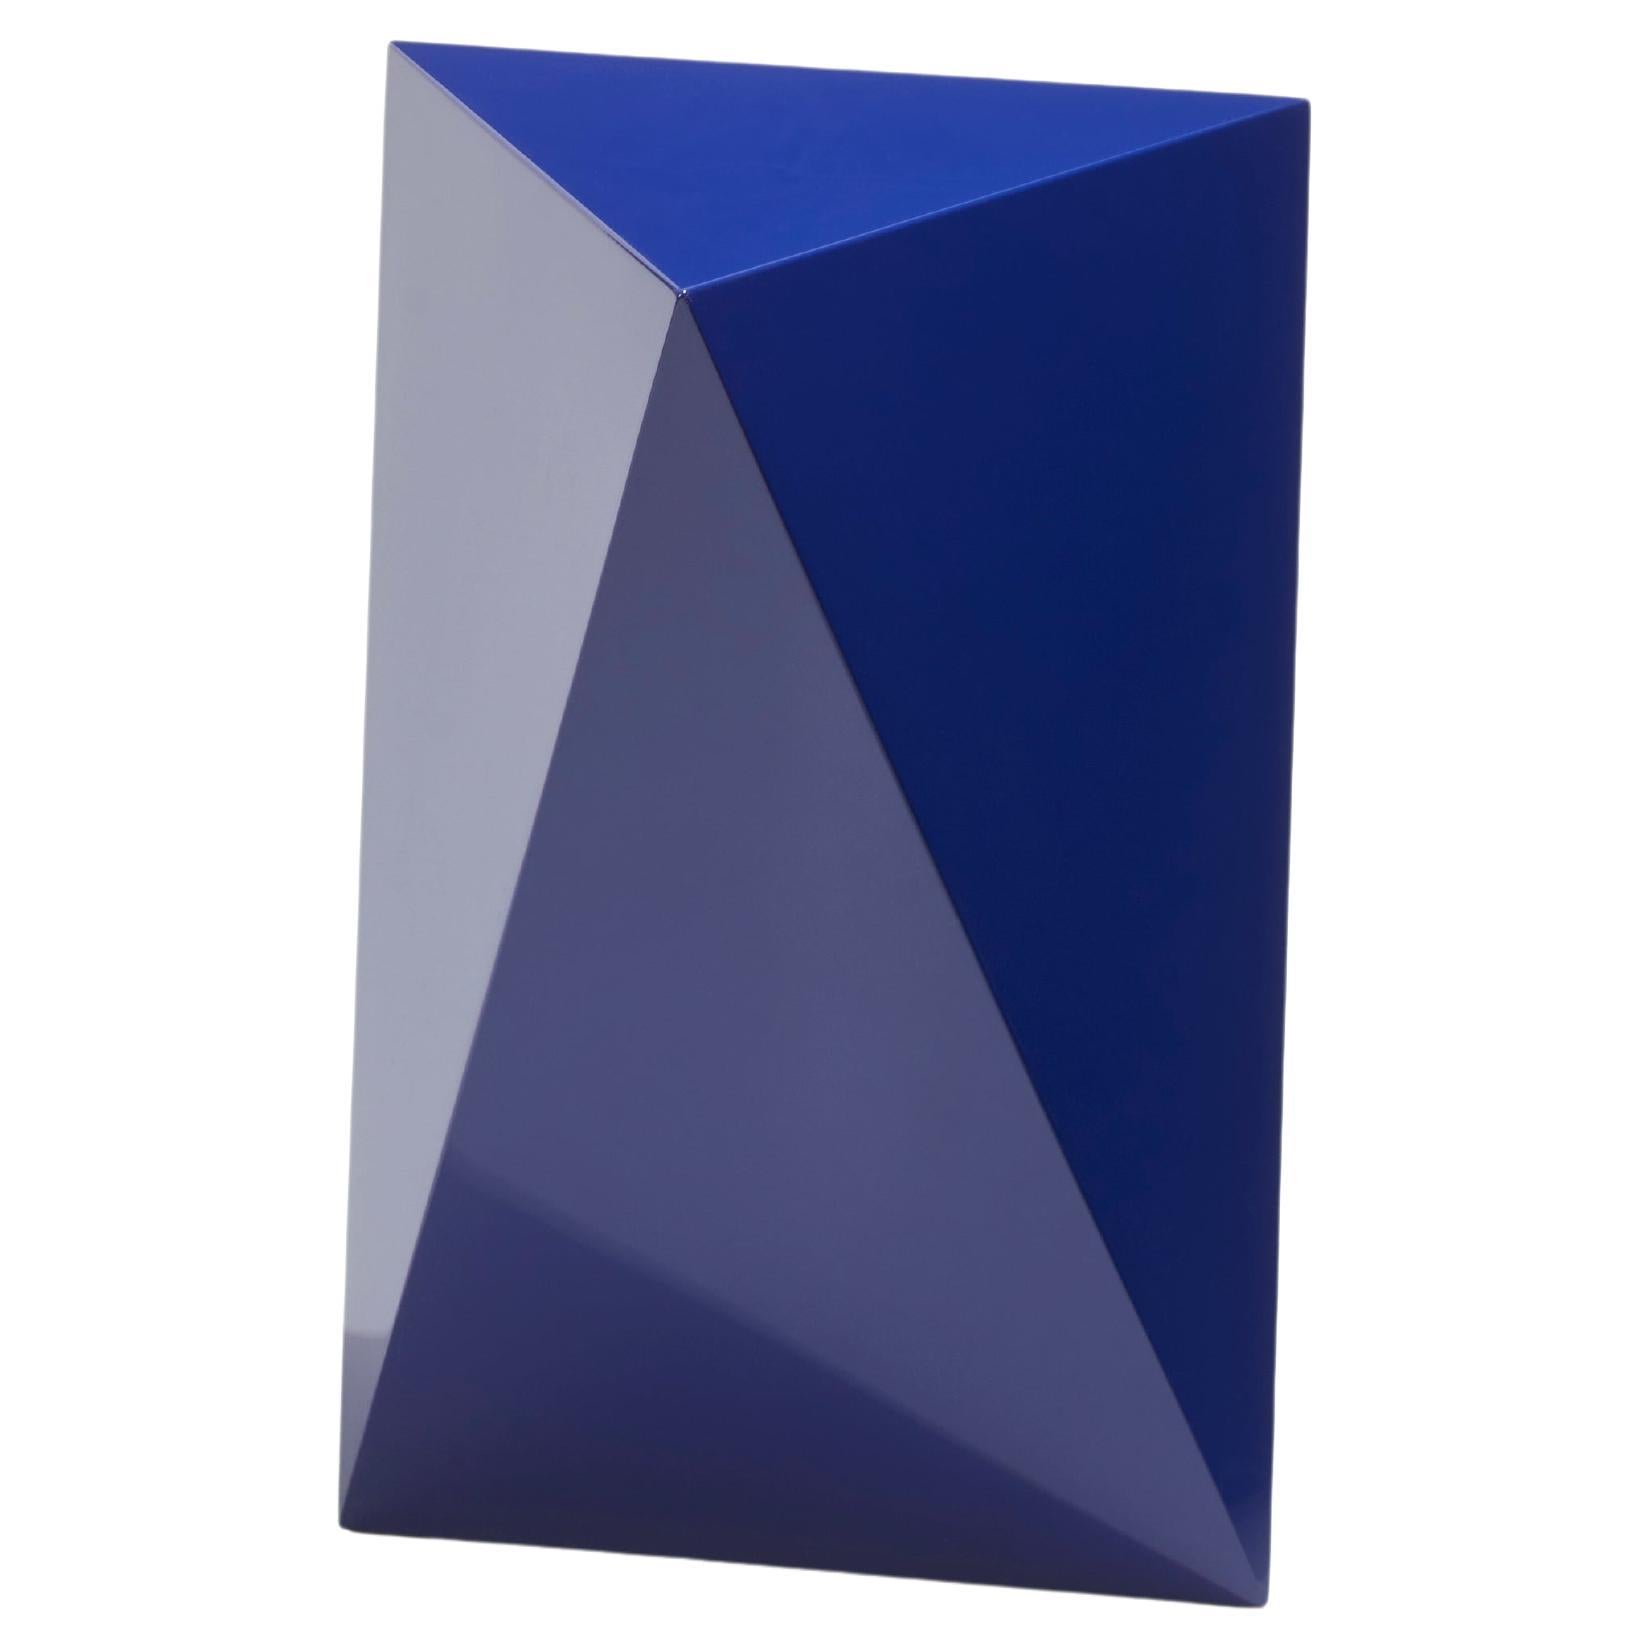 Lacquer Sellette Rythme by Herve Langlais for Galerie Negropontes